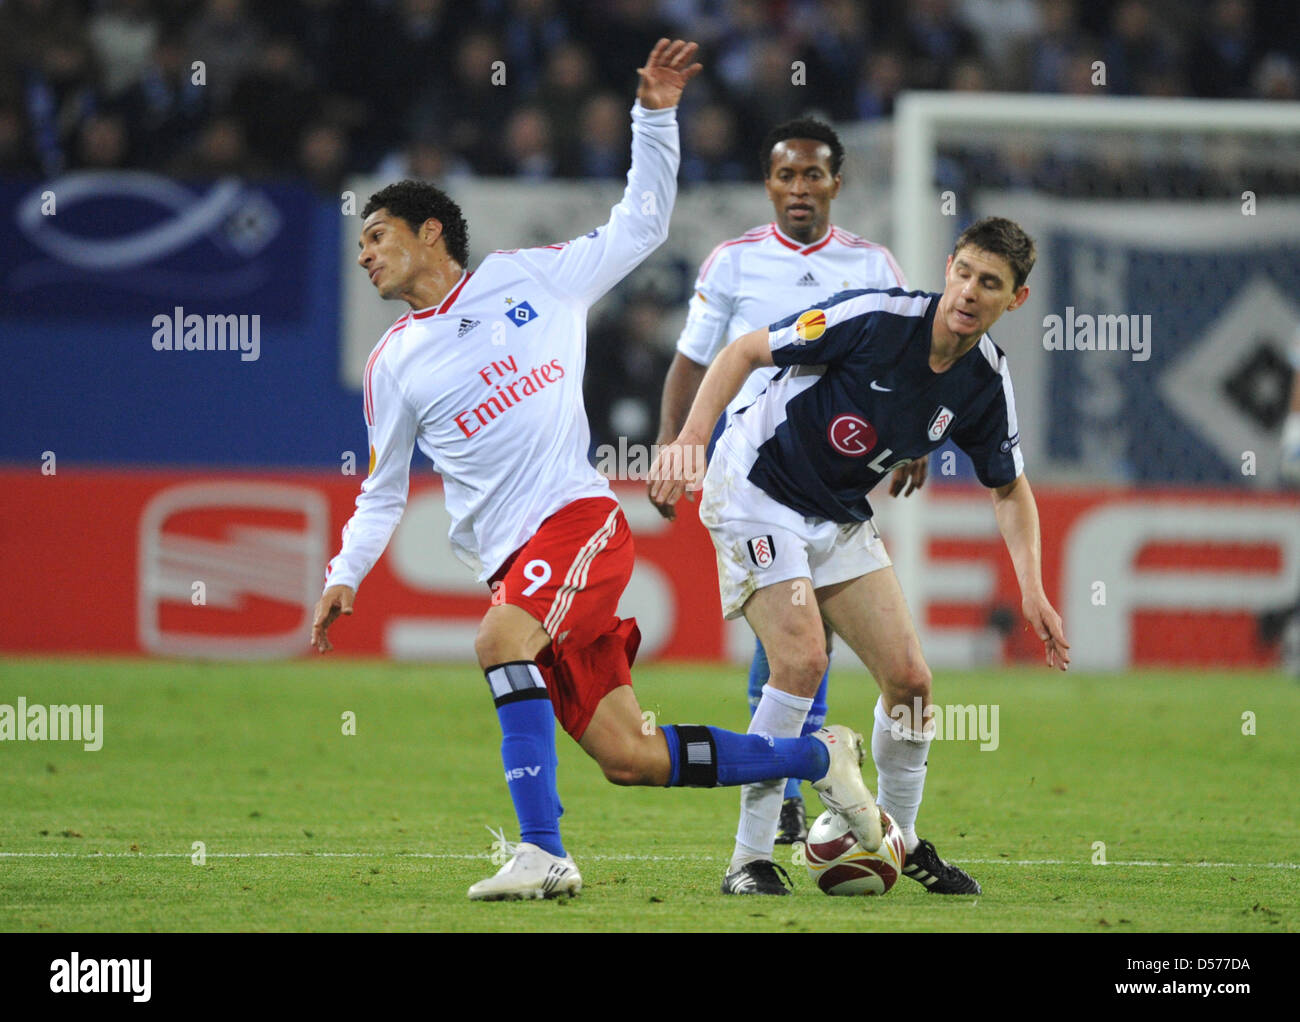 Hamburg's José Paolo Guerrero (L) and Fulham's Zoltan Gera (R) vie for the ball during the UEFA Europa League semi-final first leg match SV Hamburg vs Fulham FC at Hamburg Arena stadium in Hamburg, Germany, 22 April 2010. The match ended in a 0-0 tie. Photo: MARCUS BRANDT Stock Photo